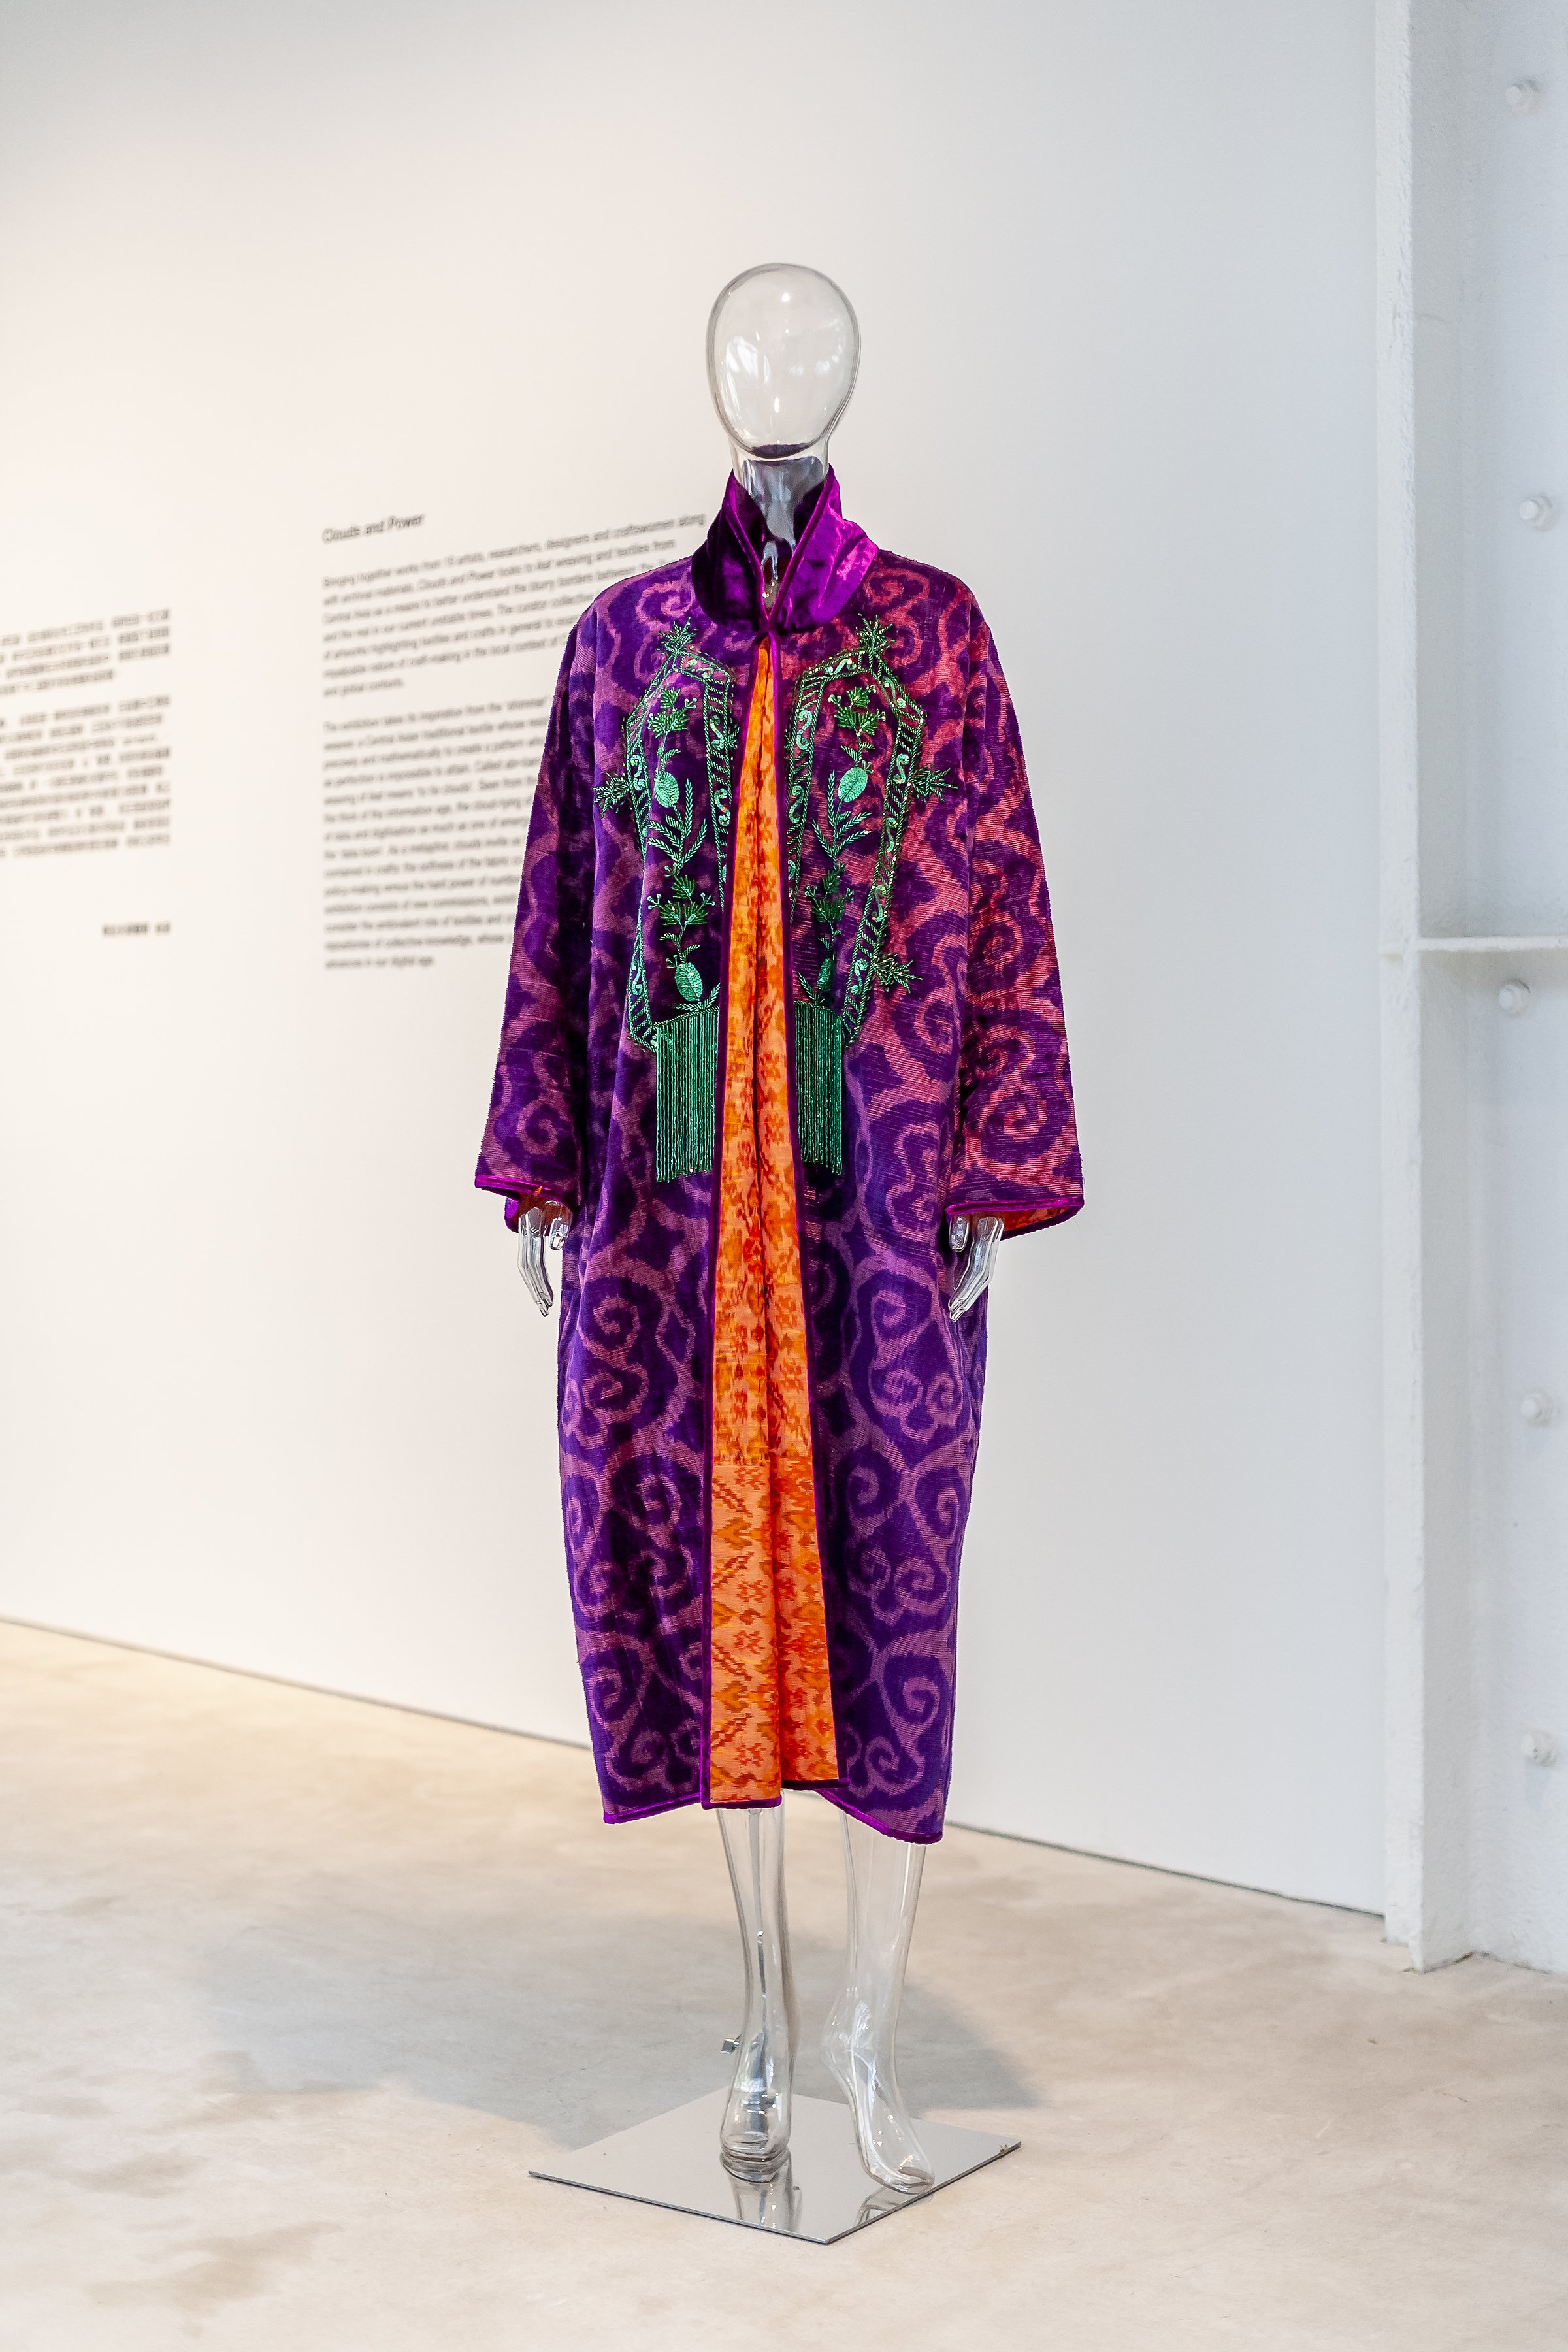 Exhibition view: Clouds, Power and Ornament – Roving Central Asia, CHAT  (Centre for Heritage, Arts and Textile), Hong Kong, 2023 (Copy)